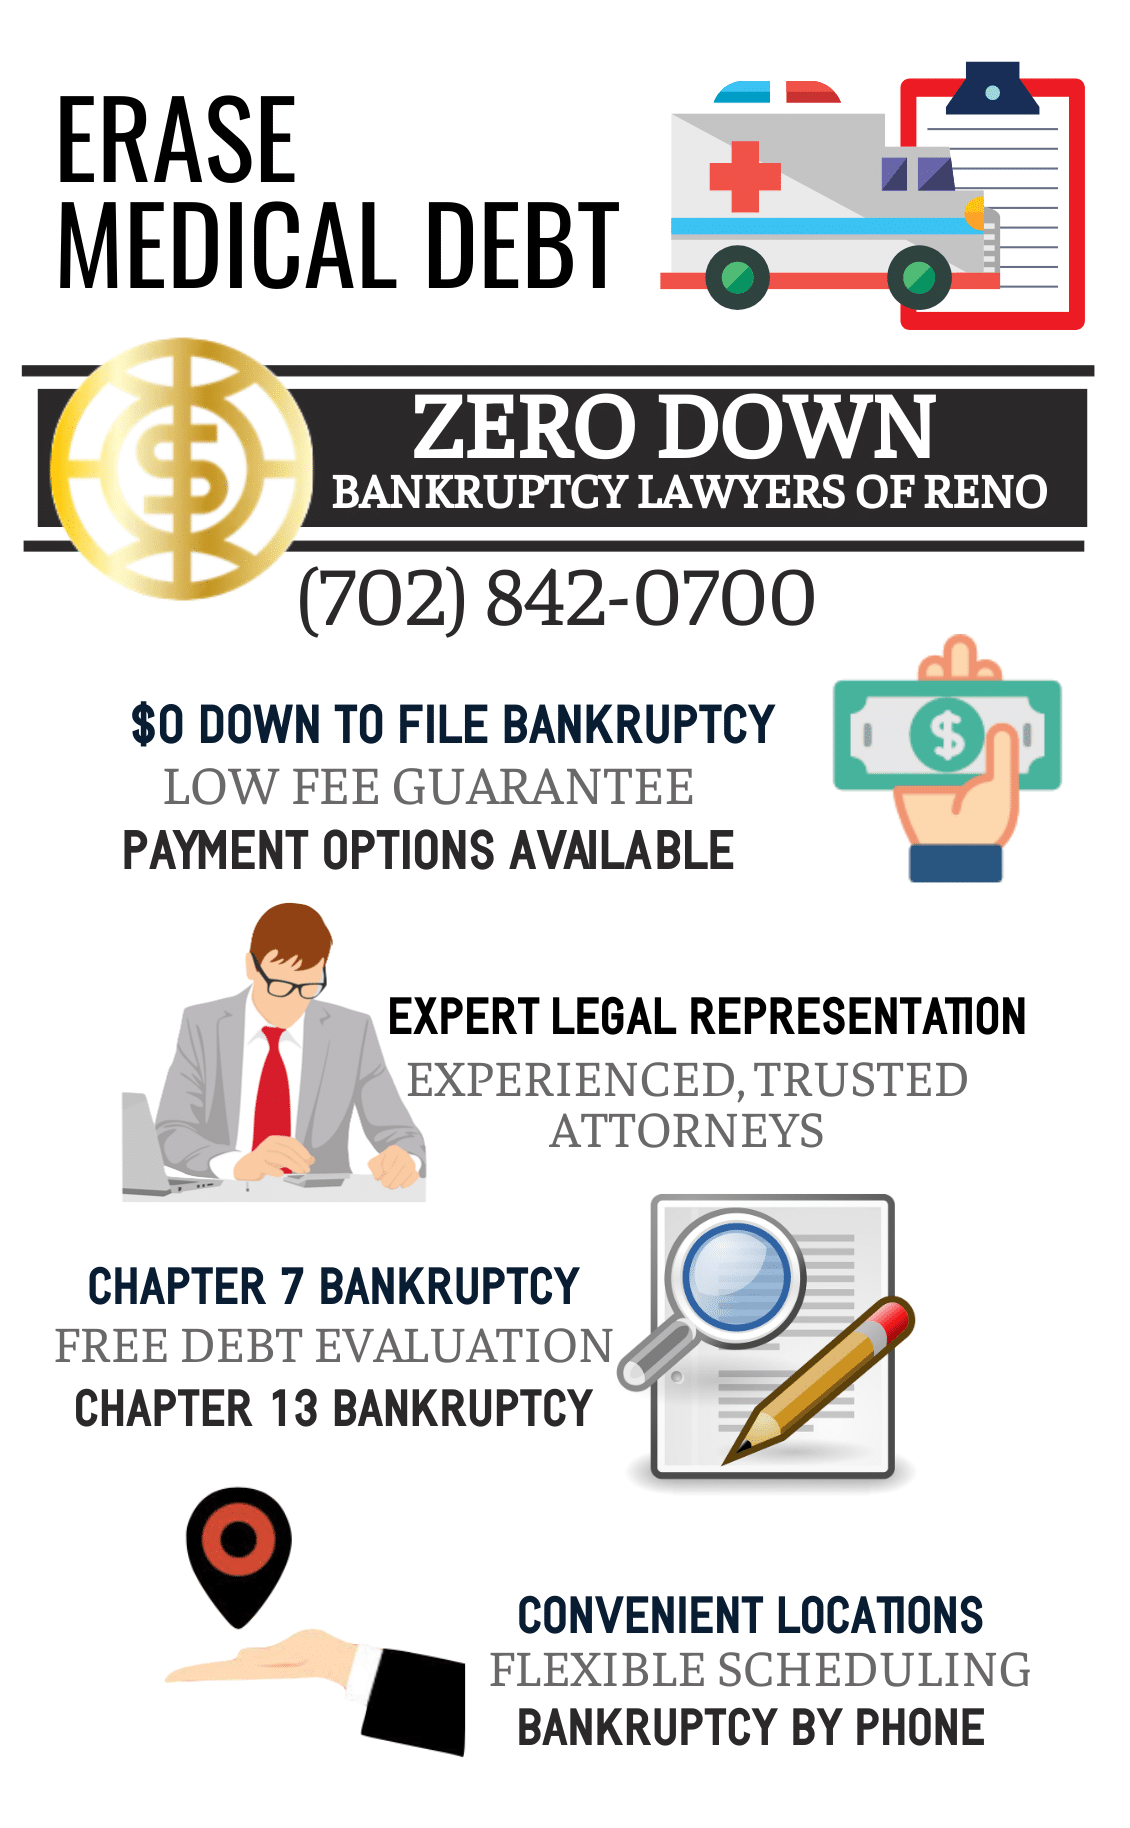 medical debt and bankruptcy infographic